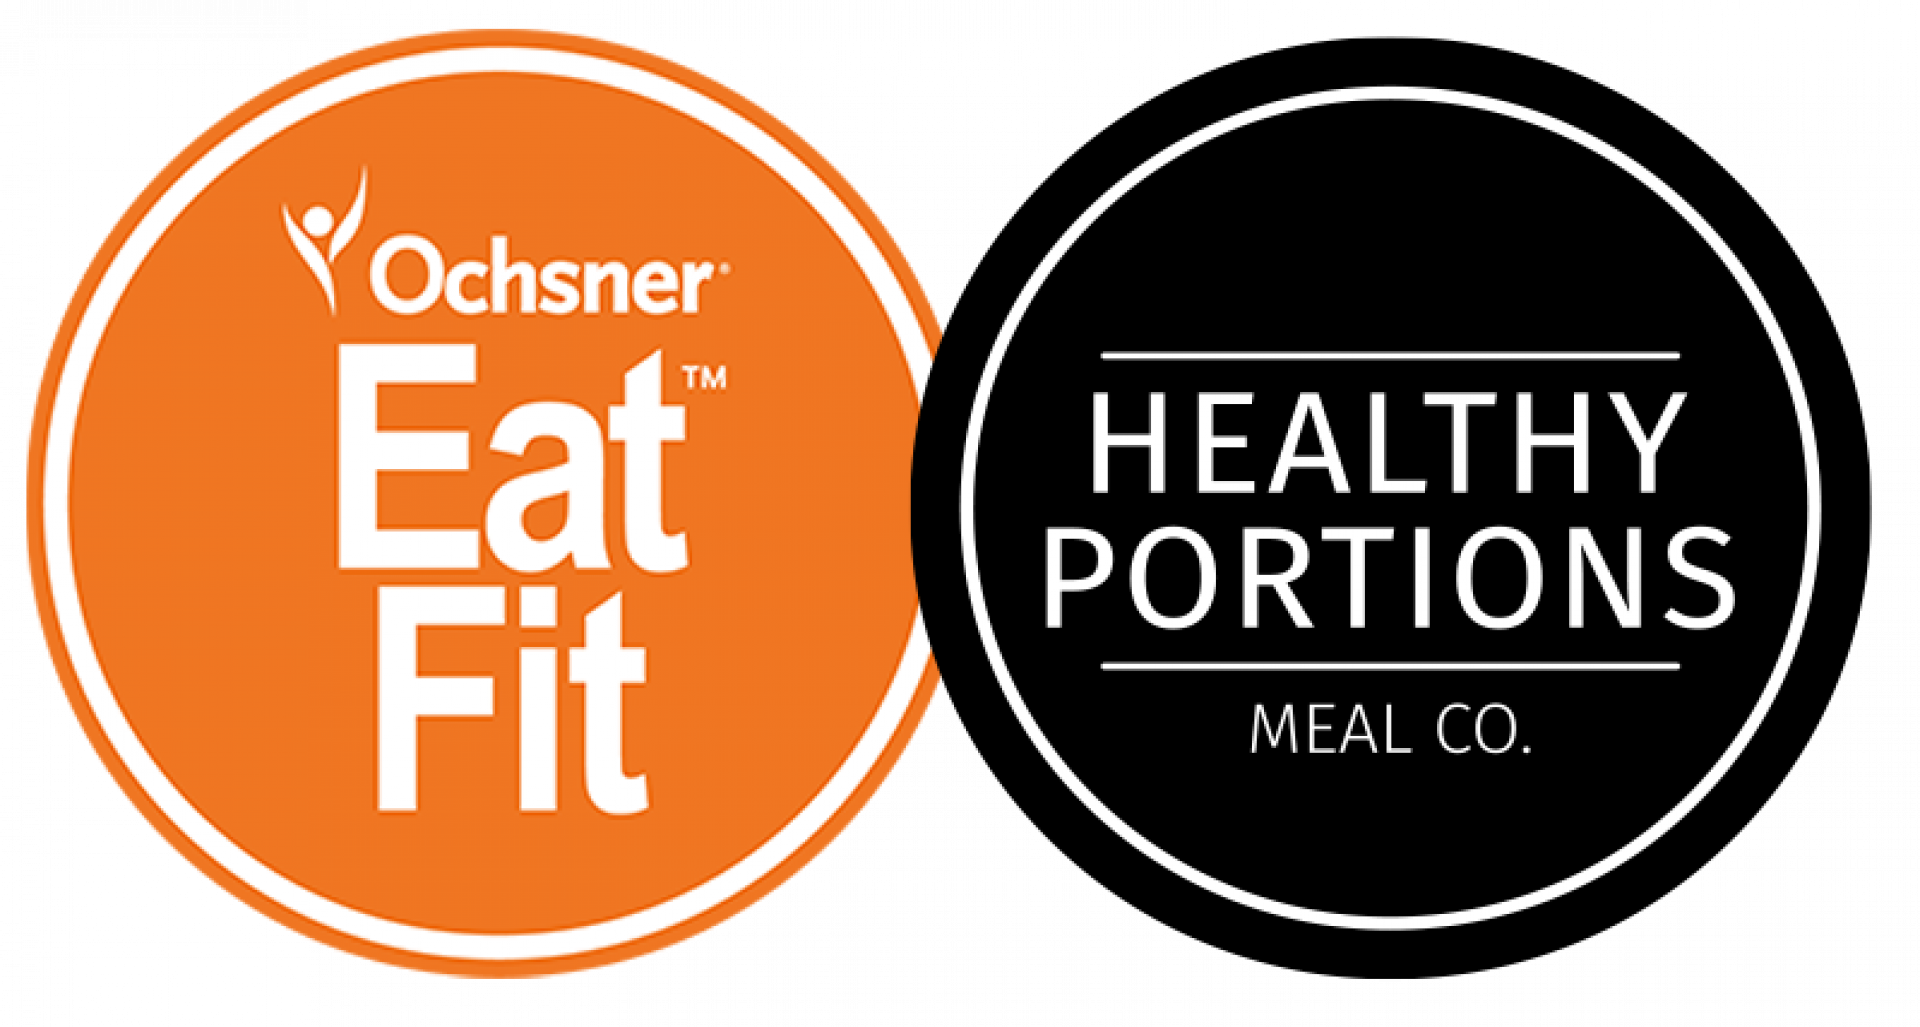 Healthy Portions Meal Co. logo